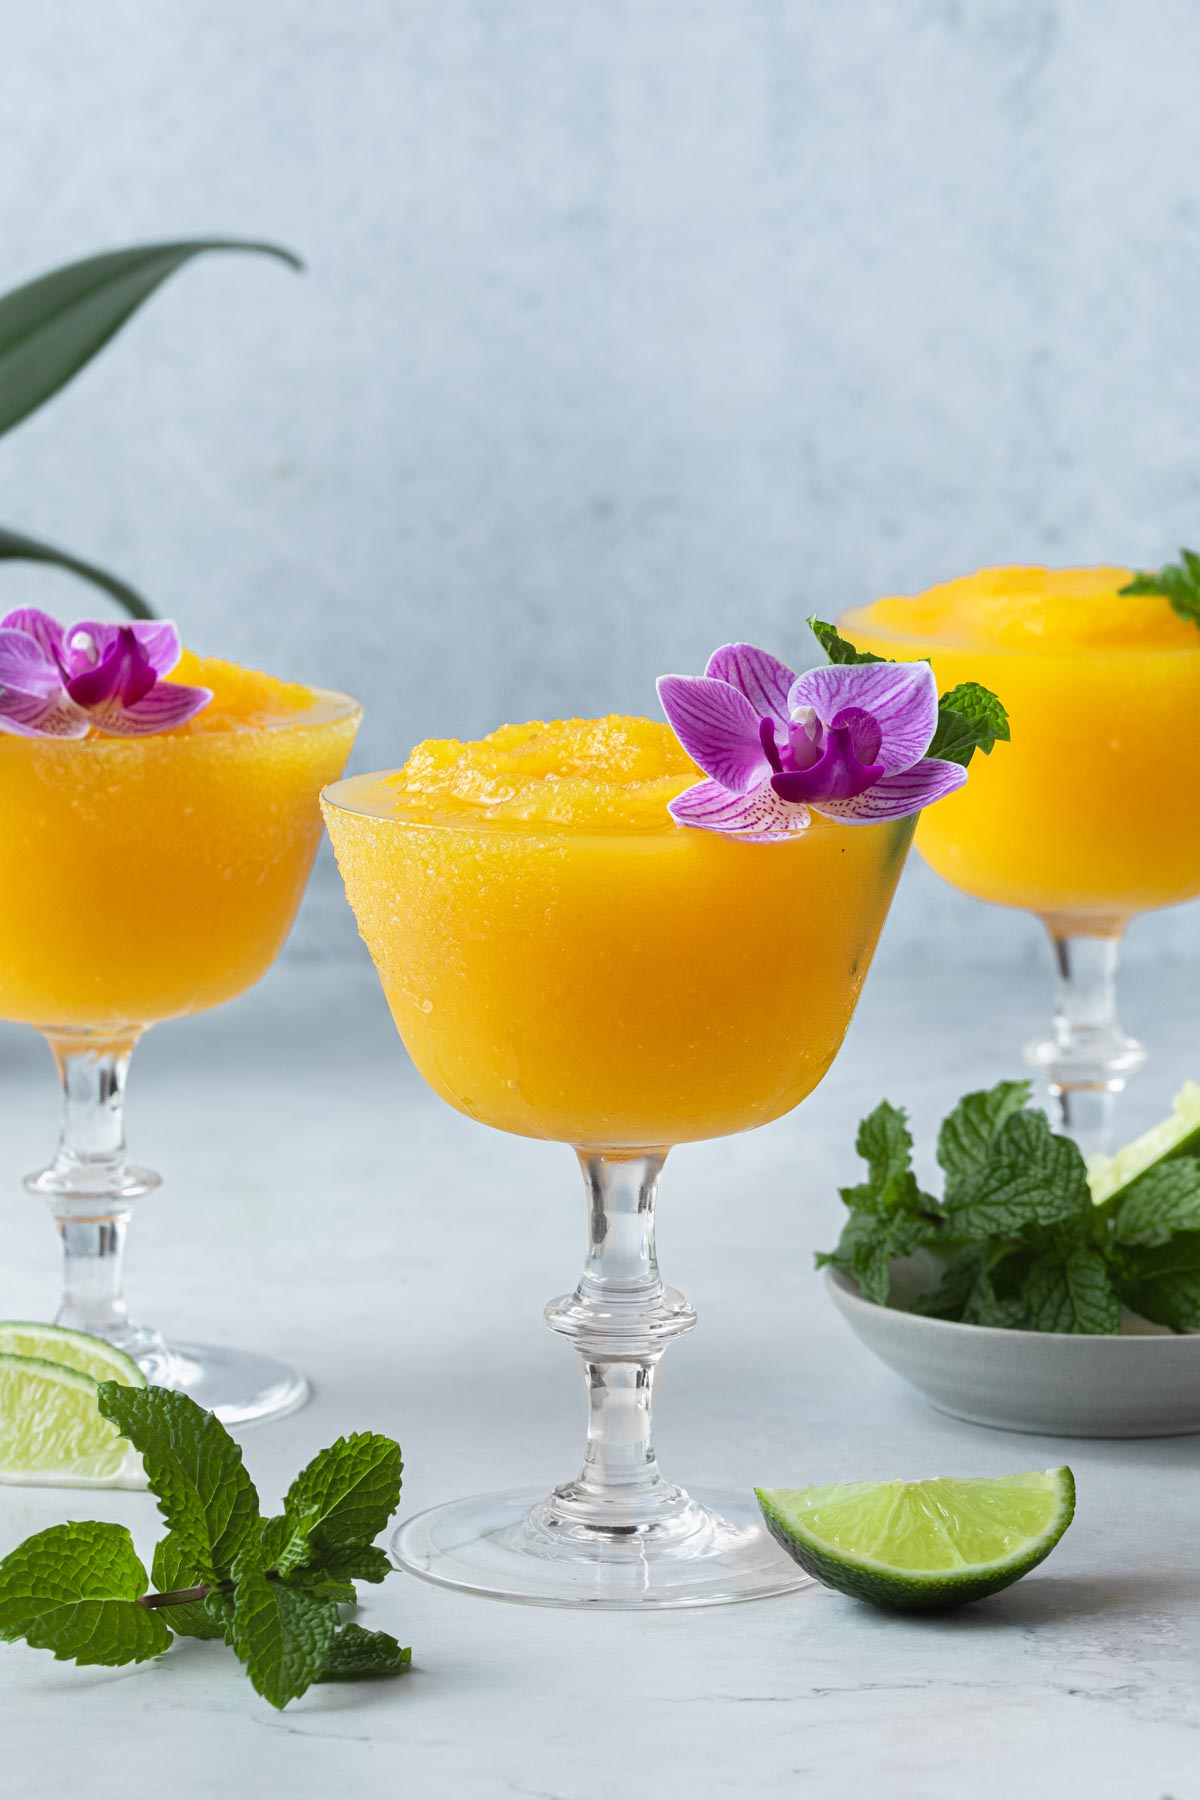  Passionfruit daiquiris in glasses garnished with an orchid and mint leaves, with a small bowl of mint leaves and wedges of lime.